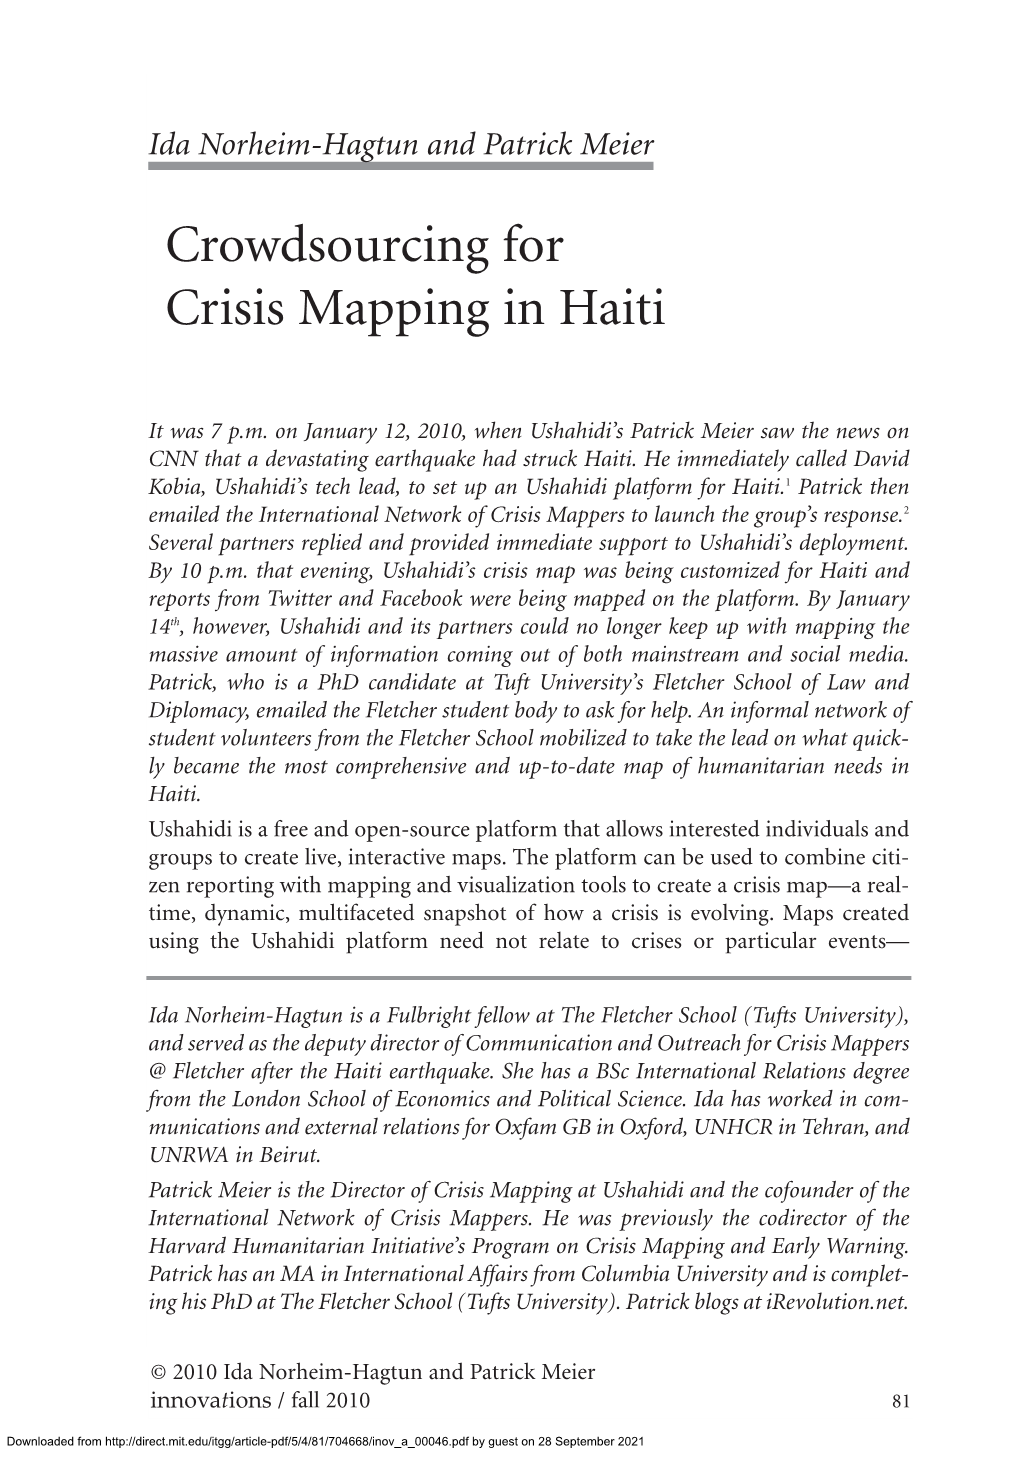 Crowdsourcing for Crisis Mapping in Haiti